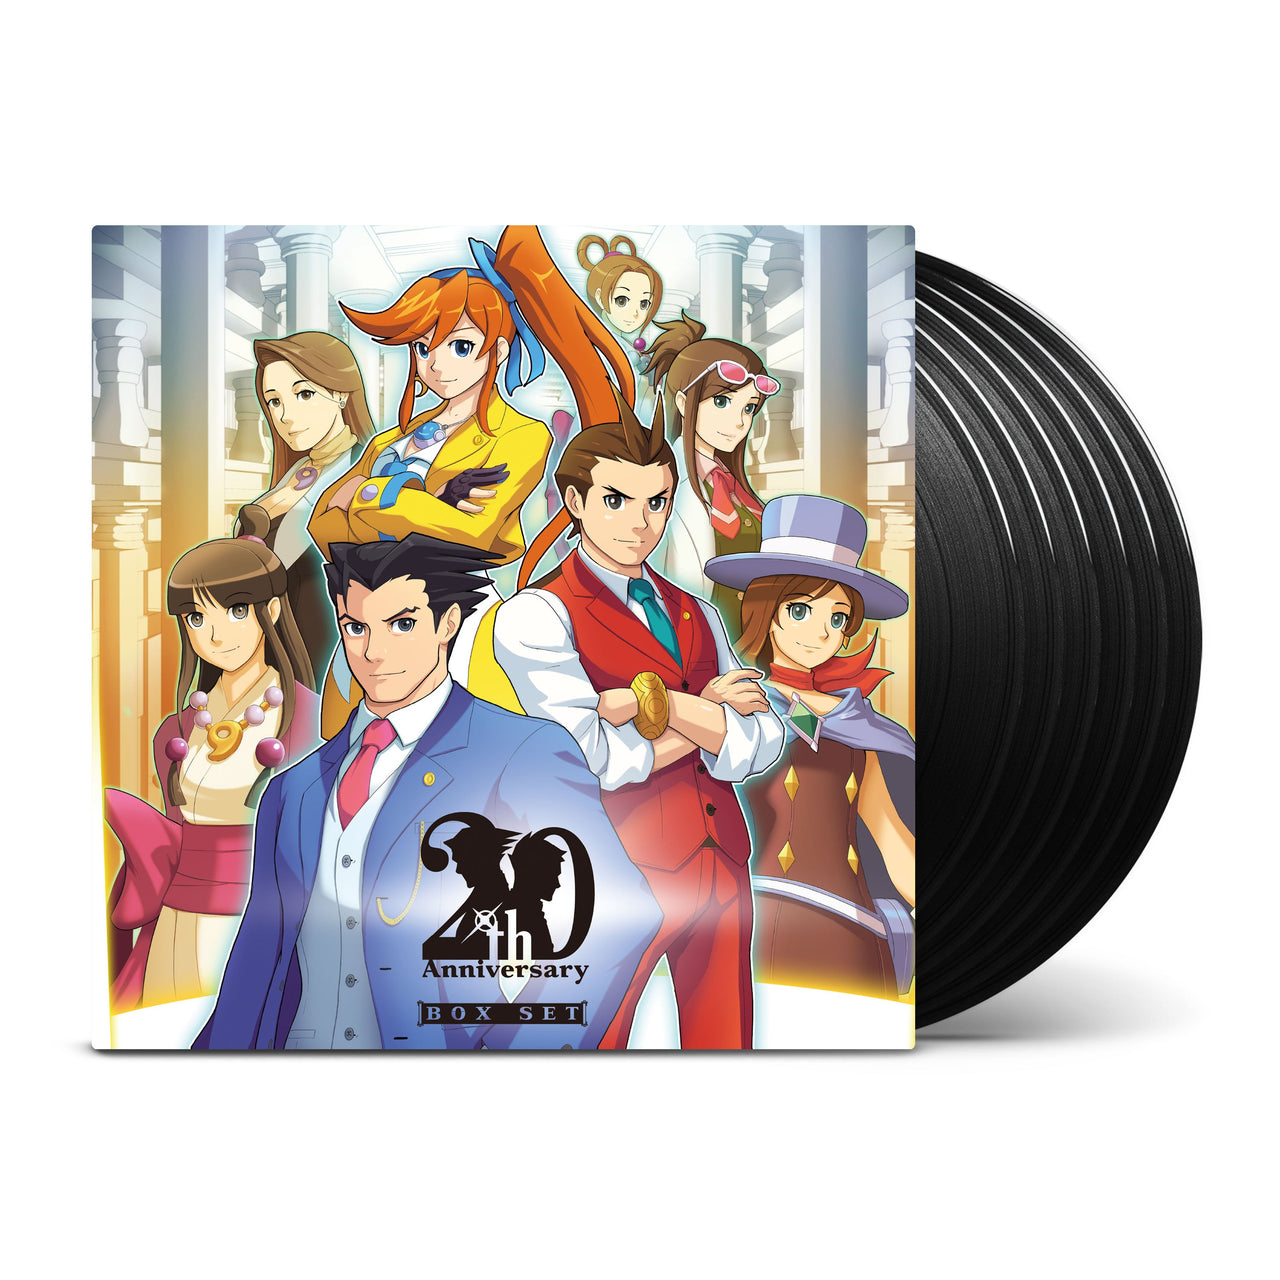 Ace Attorney anime coming April 2016 - Polygon